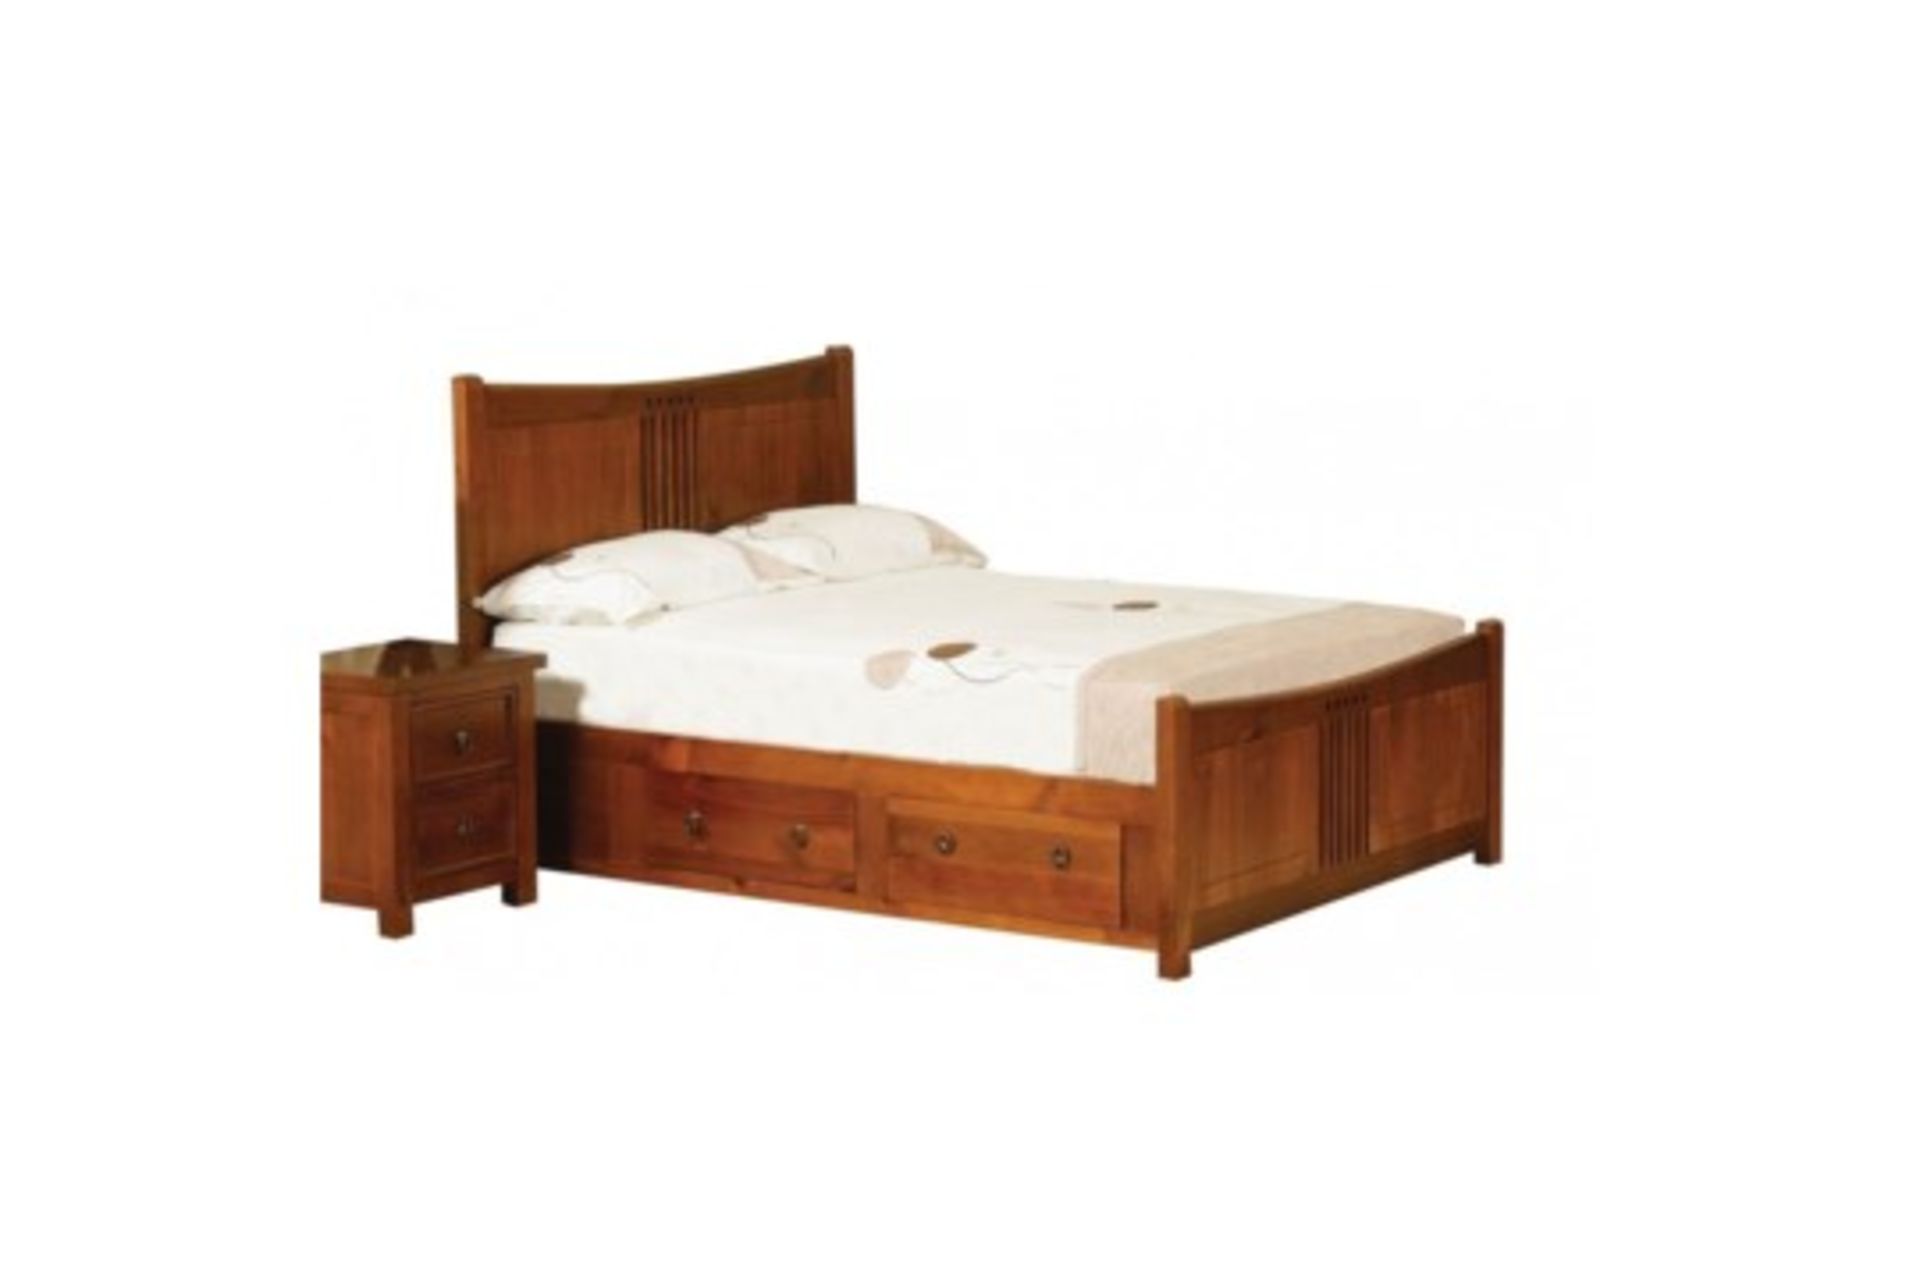 Boxed Marlo Kingsize Cherry Wood Poster Bed RRP £500